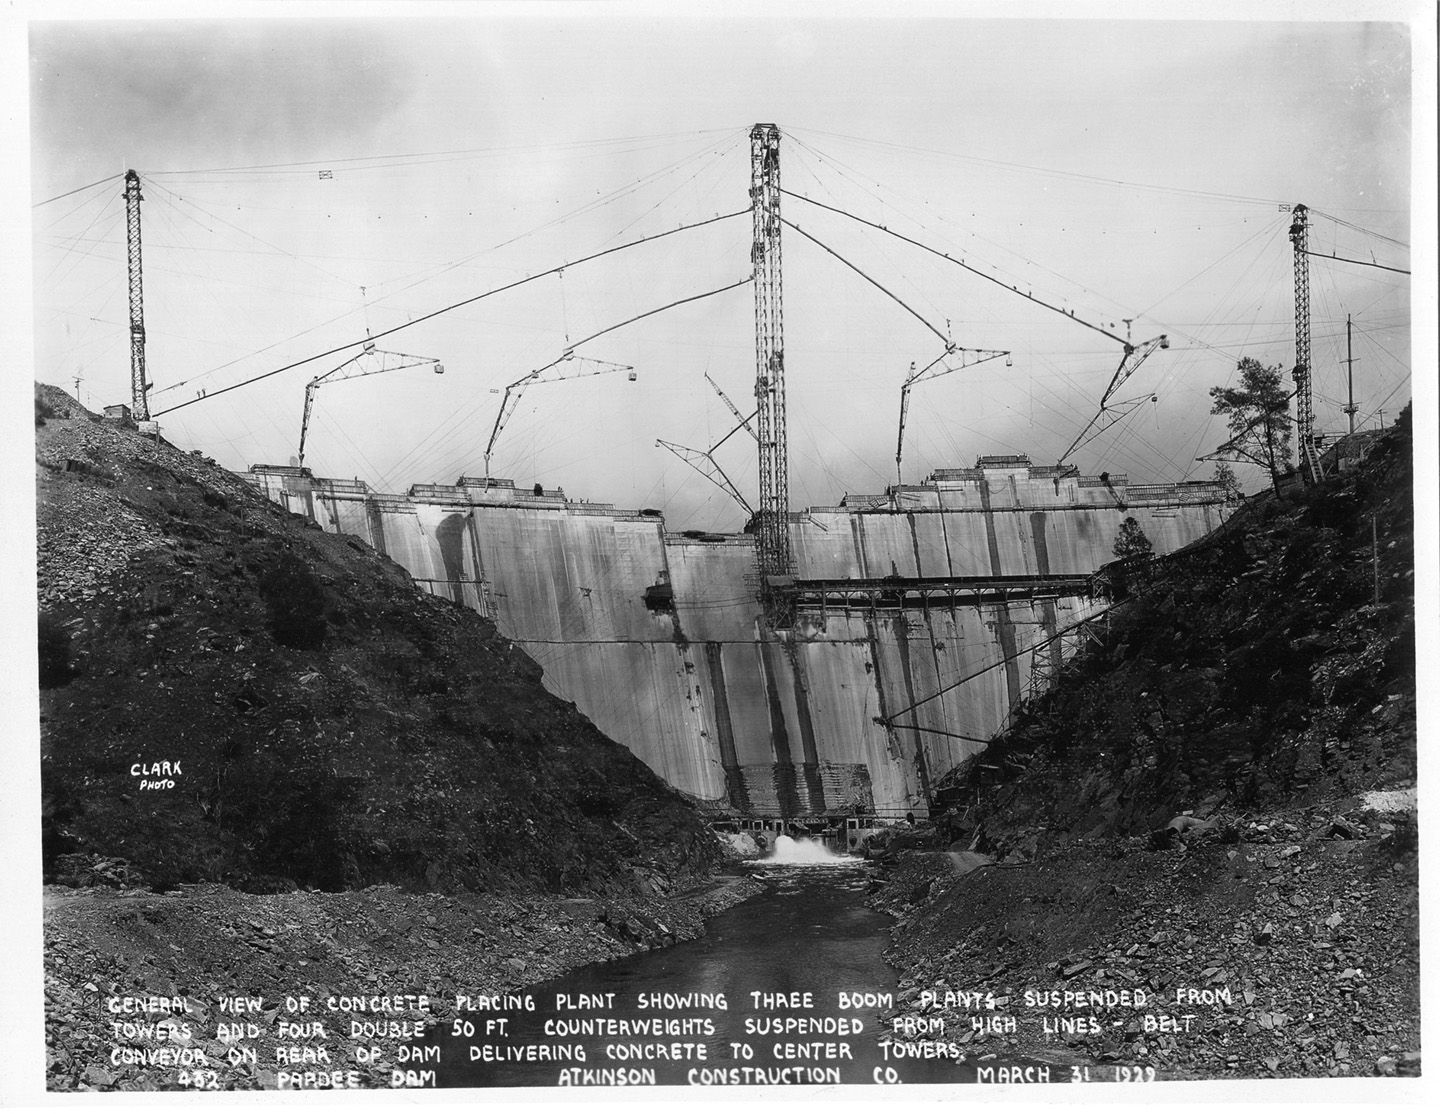 General view of concrete placing plant showing three boom plants suspended from towers and four double 50 ft. counterweights suspended from high lines - belt conveyor on rear of dam delivering concrete to center towers. (March 1929)	